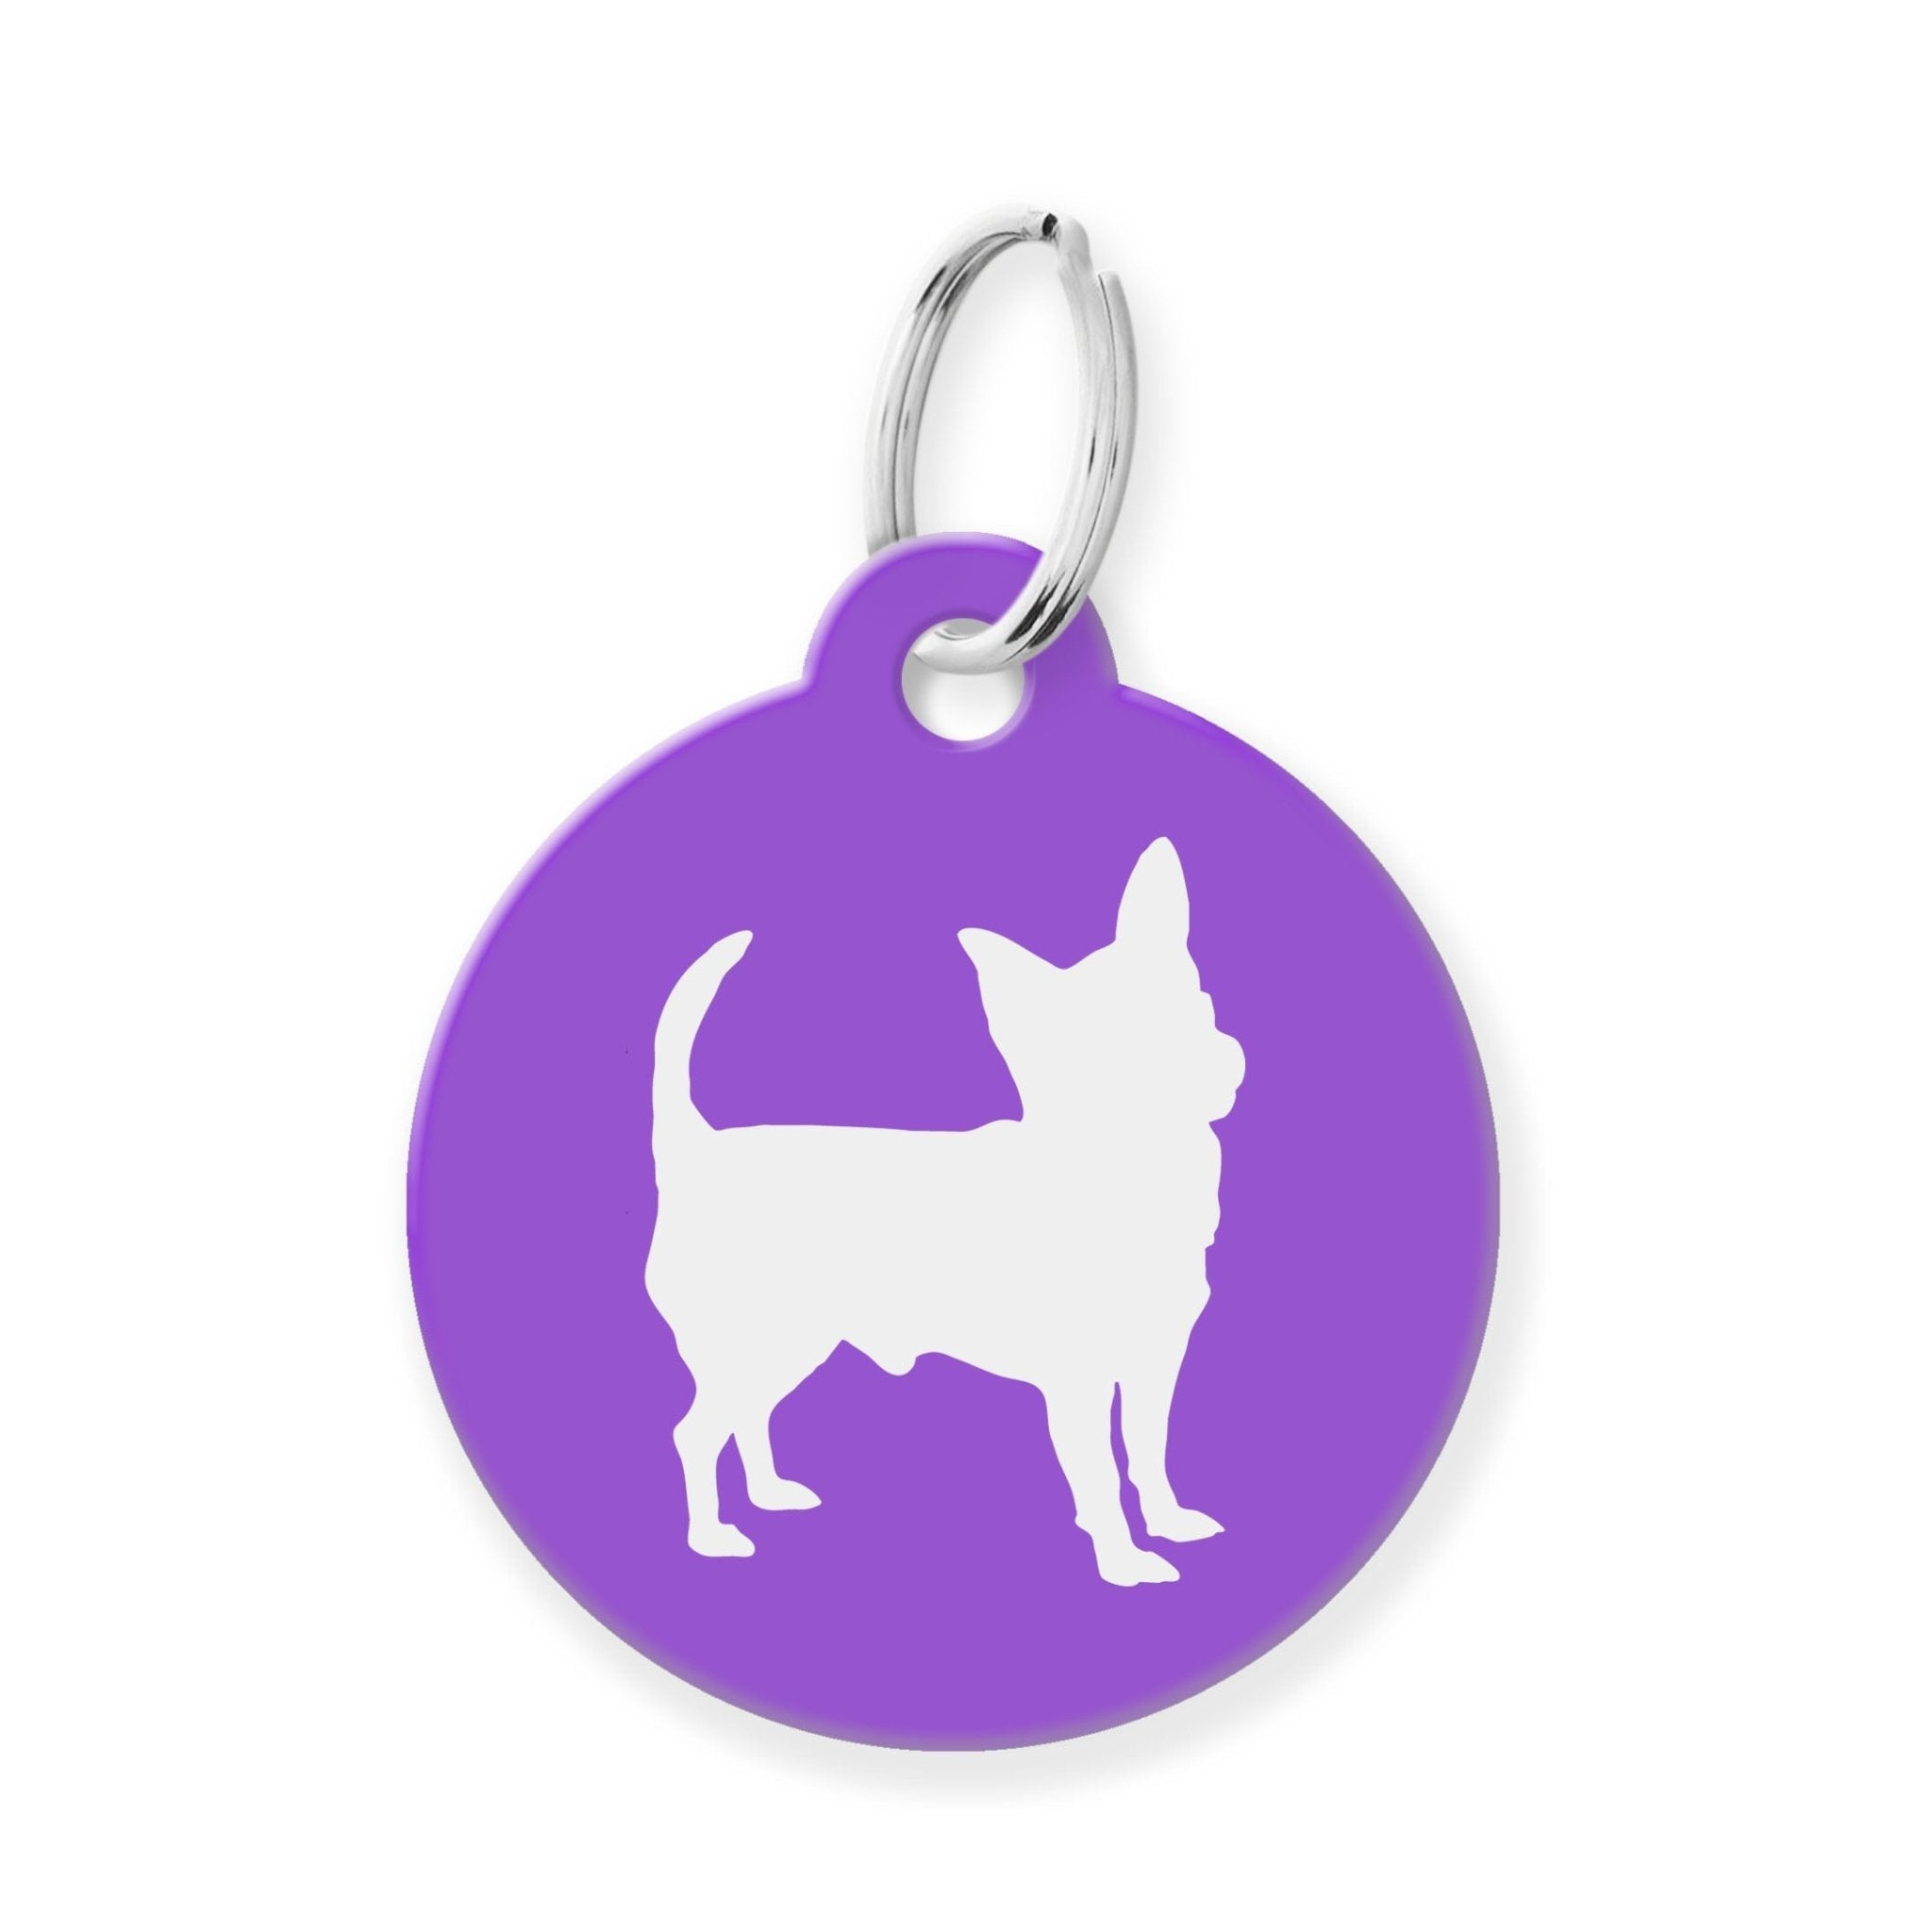 Chihuahua Silhouette Pet Tag - The Barking Mutt